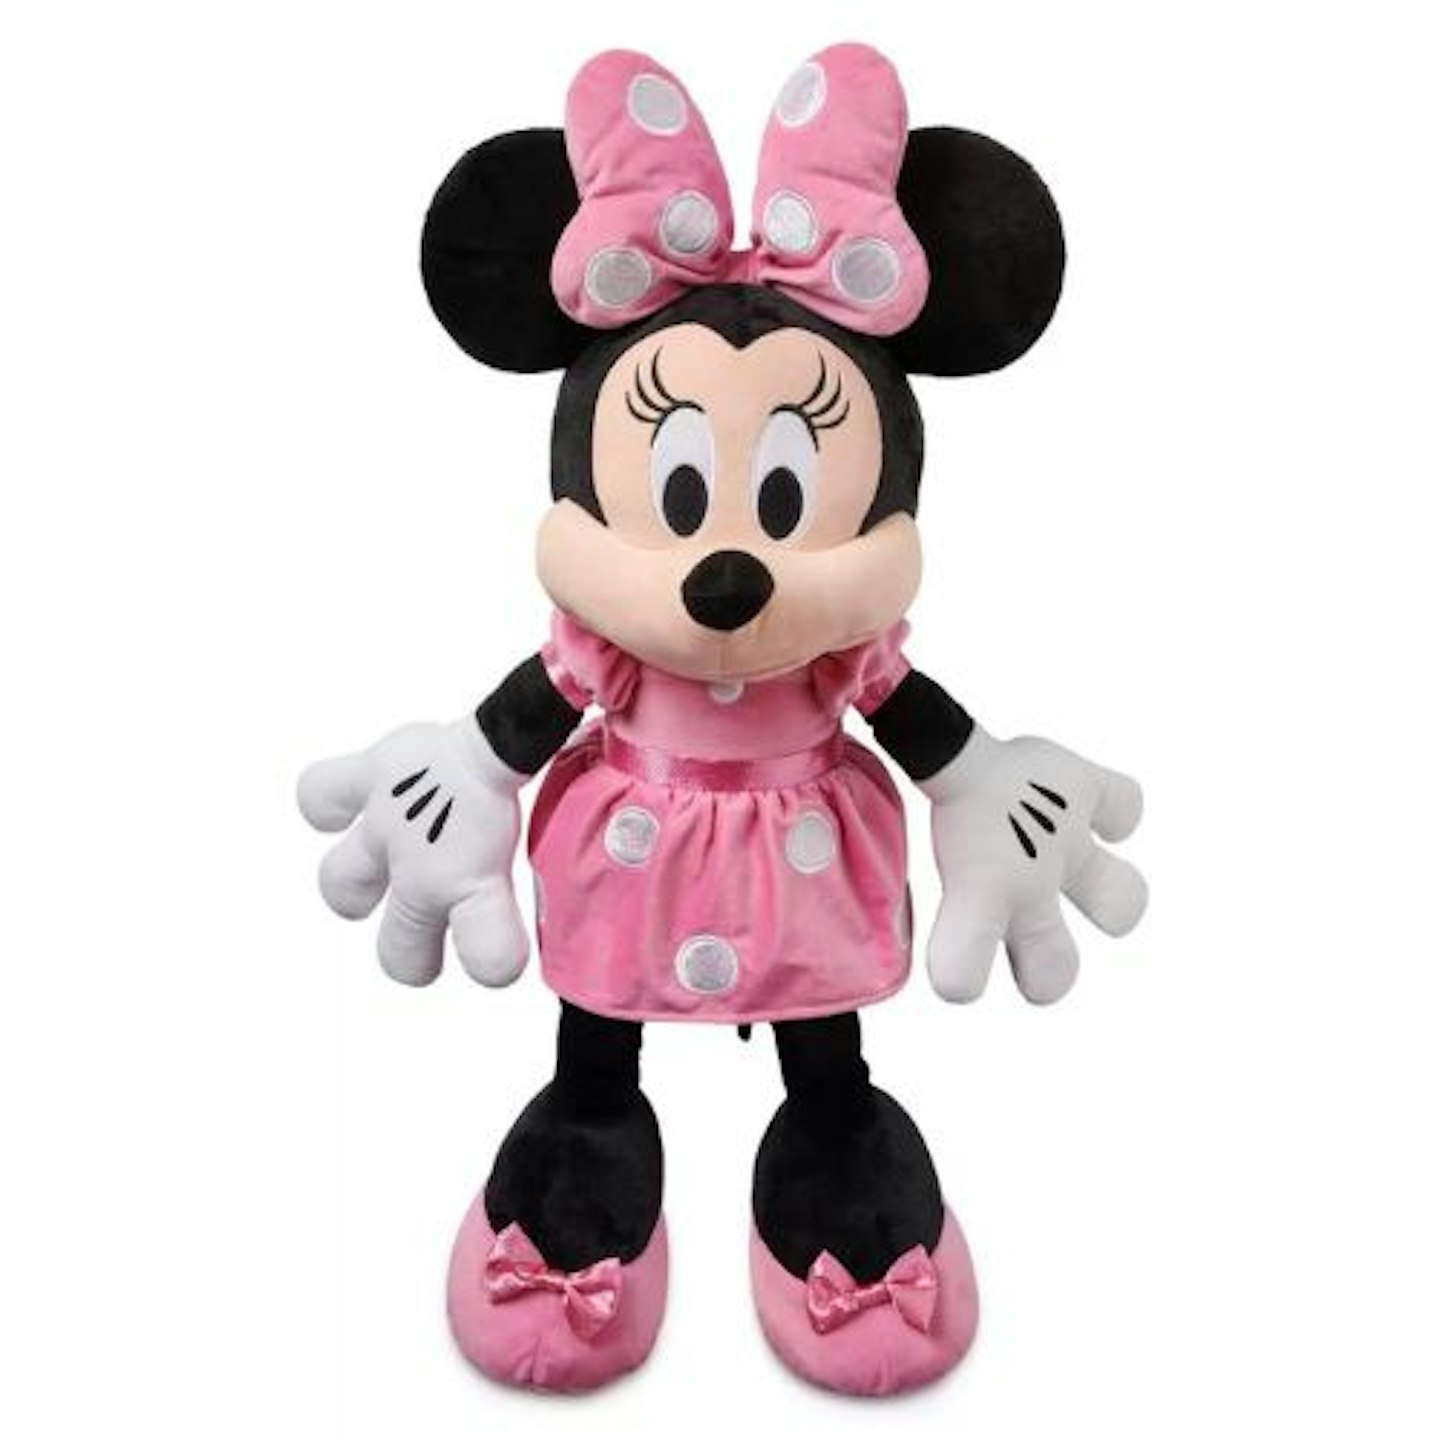 Best Minnie Mouse toy Disney Store Minnie Mouse Large Pink Soft Toy